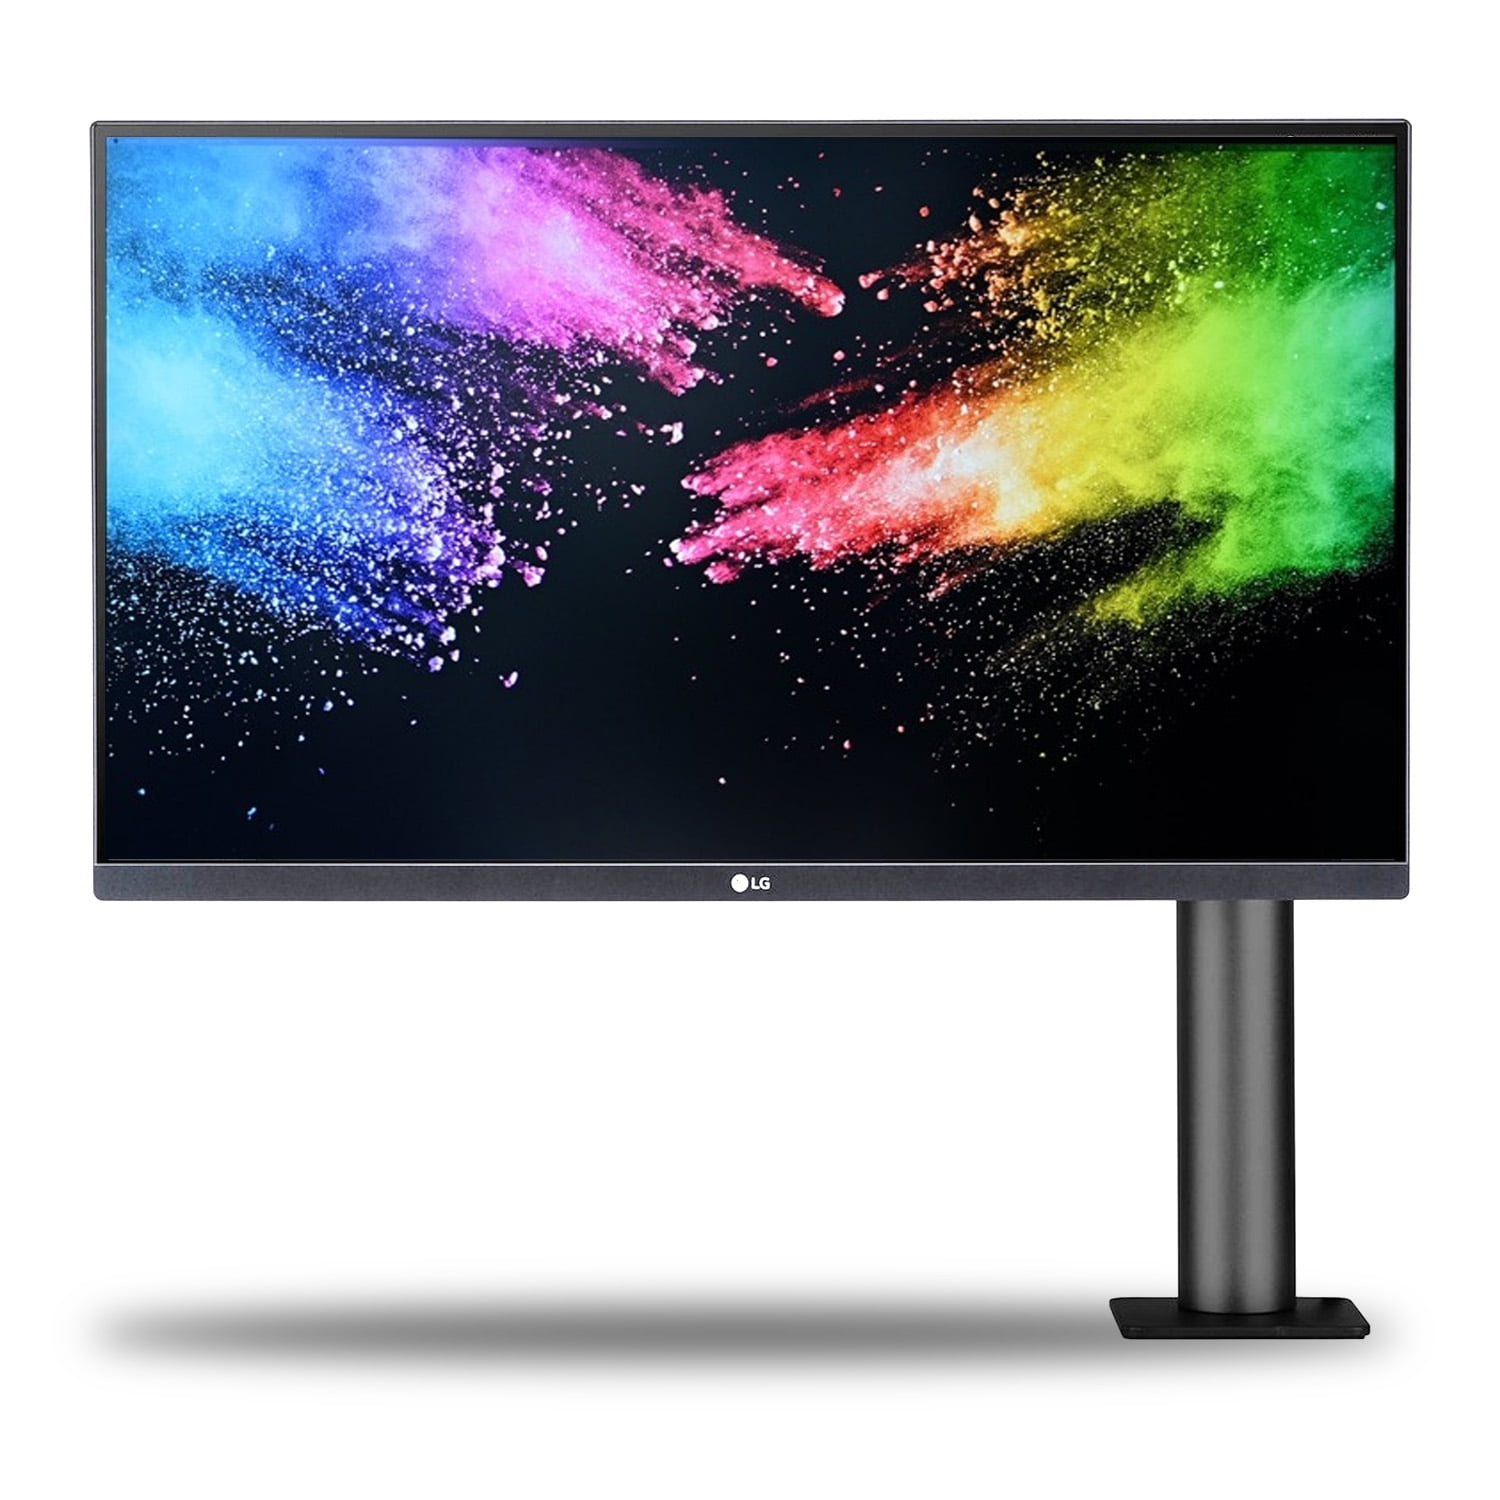 LG UltraFine Display Ergo 32UN880-B 31.5 16:9 4K HDR FreeSync IPS Monitor  + HDMI Cable + USB-C Cable and Cleaning Kit 